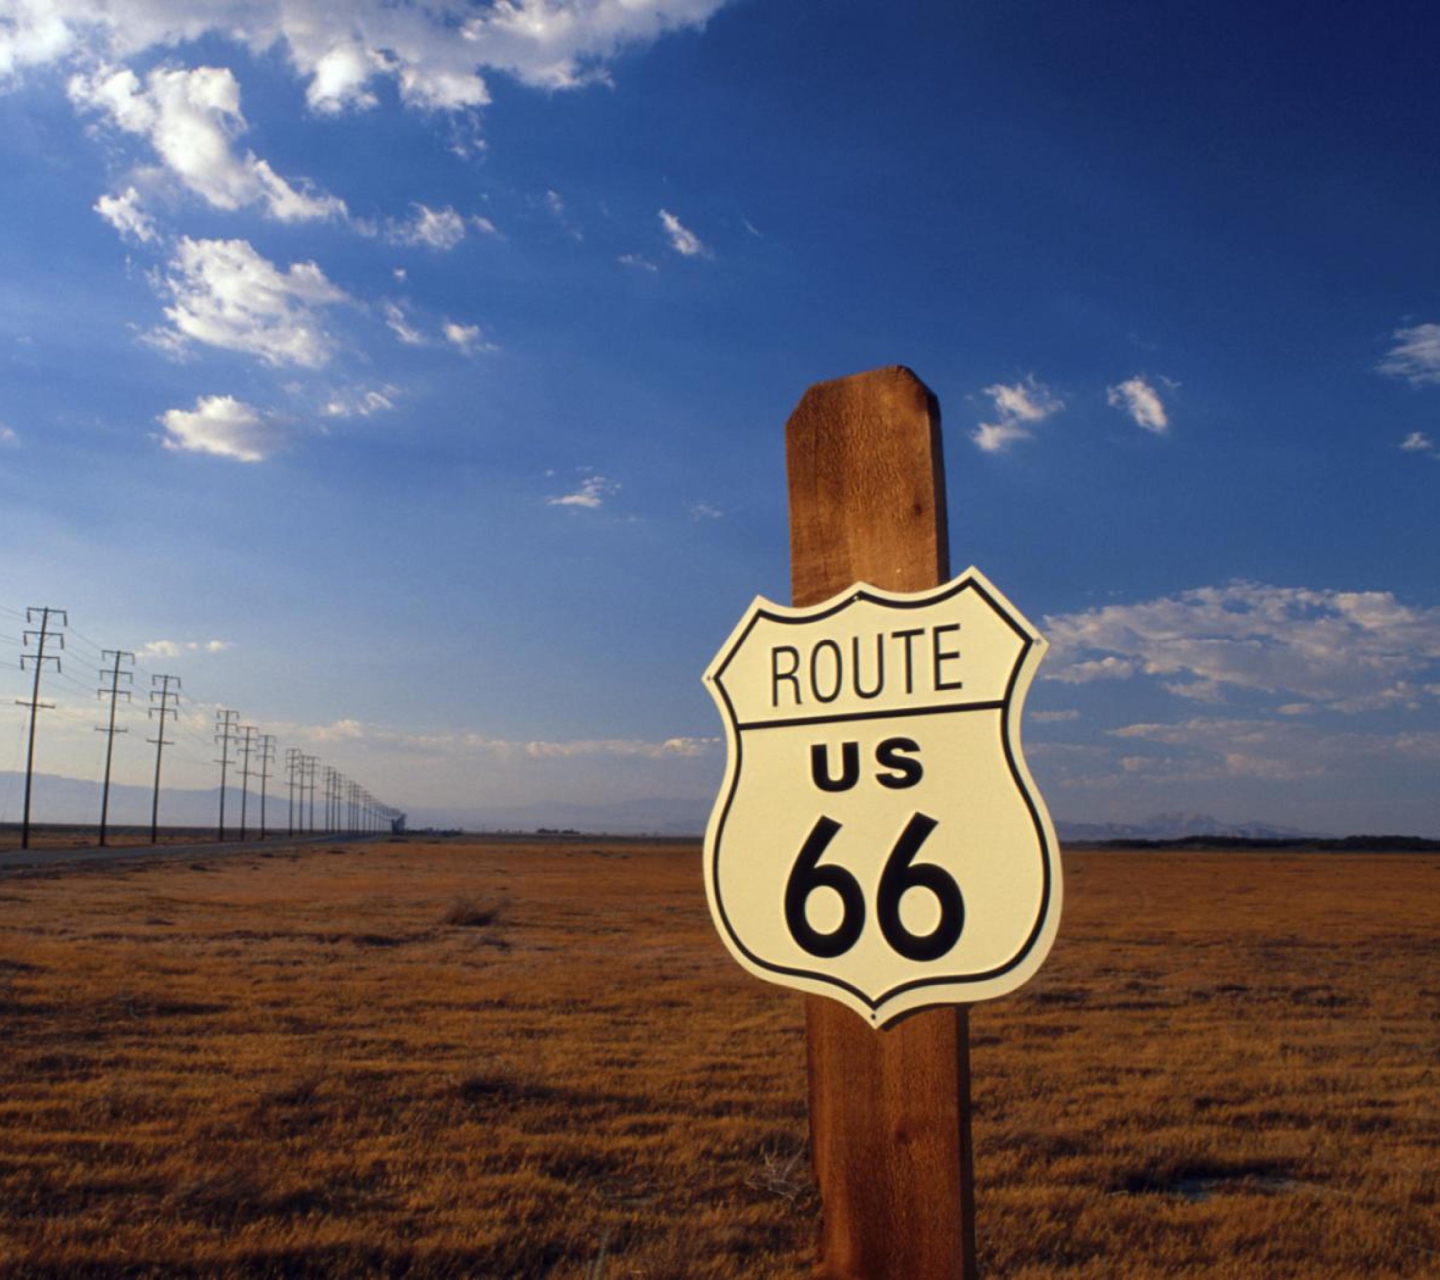 America's Most Famous Route 66 wallpaper 1440x1280